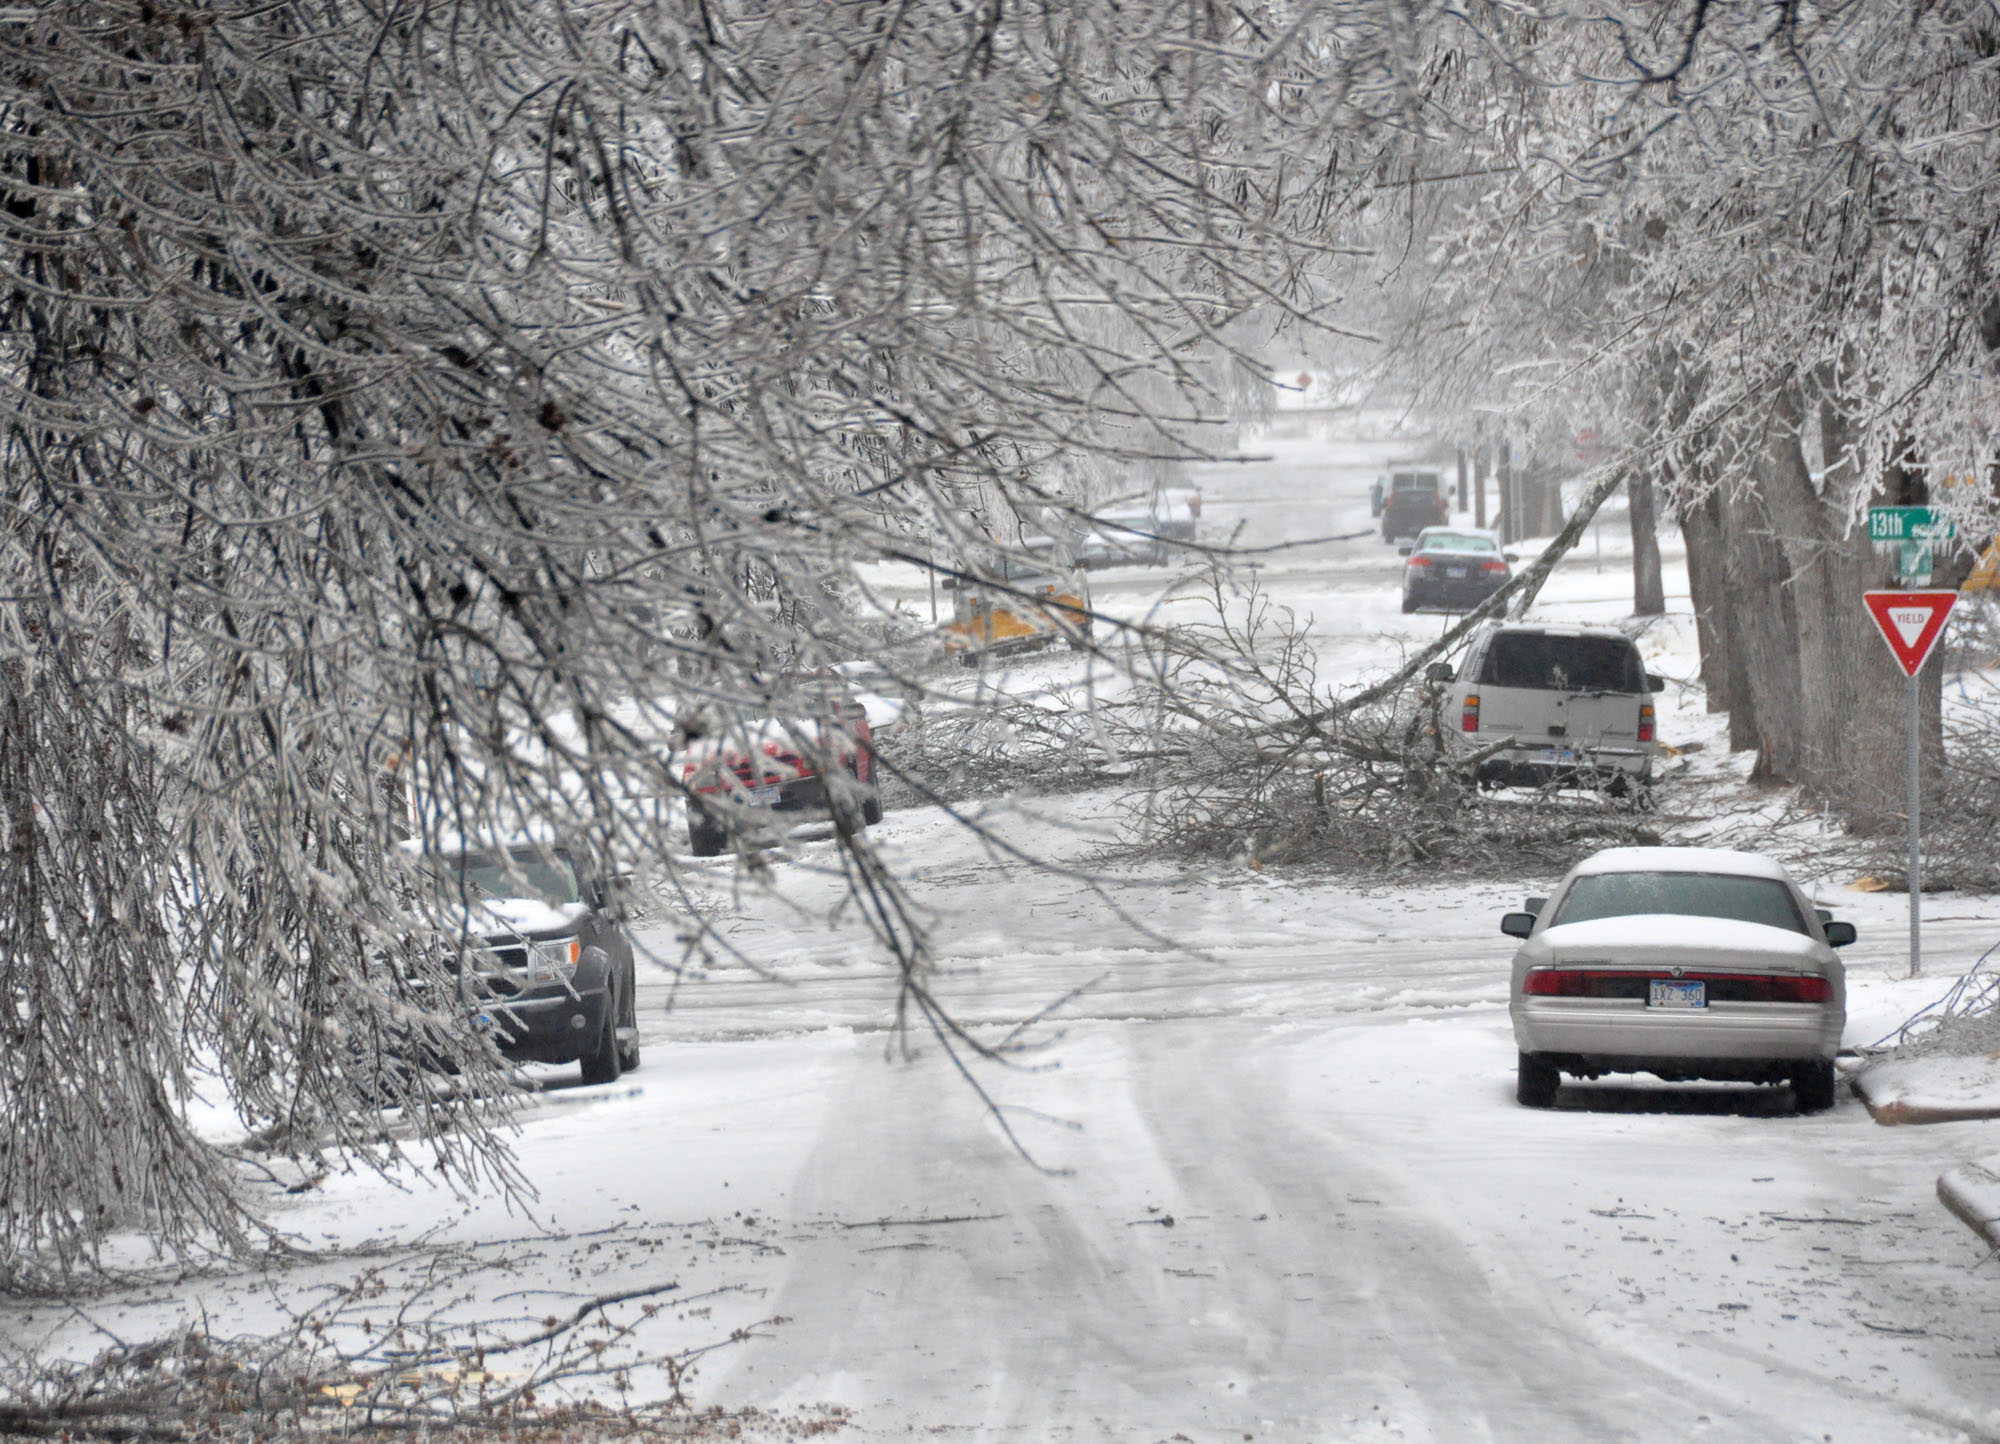 Icy branches fall on parked cars in snow storm in Sioux Falls SD